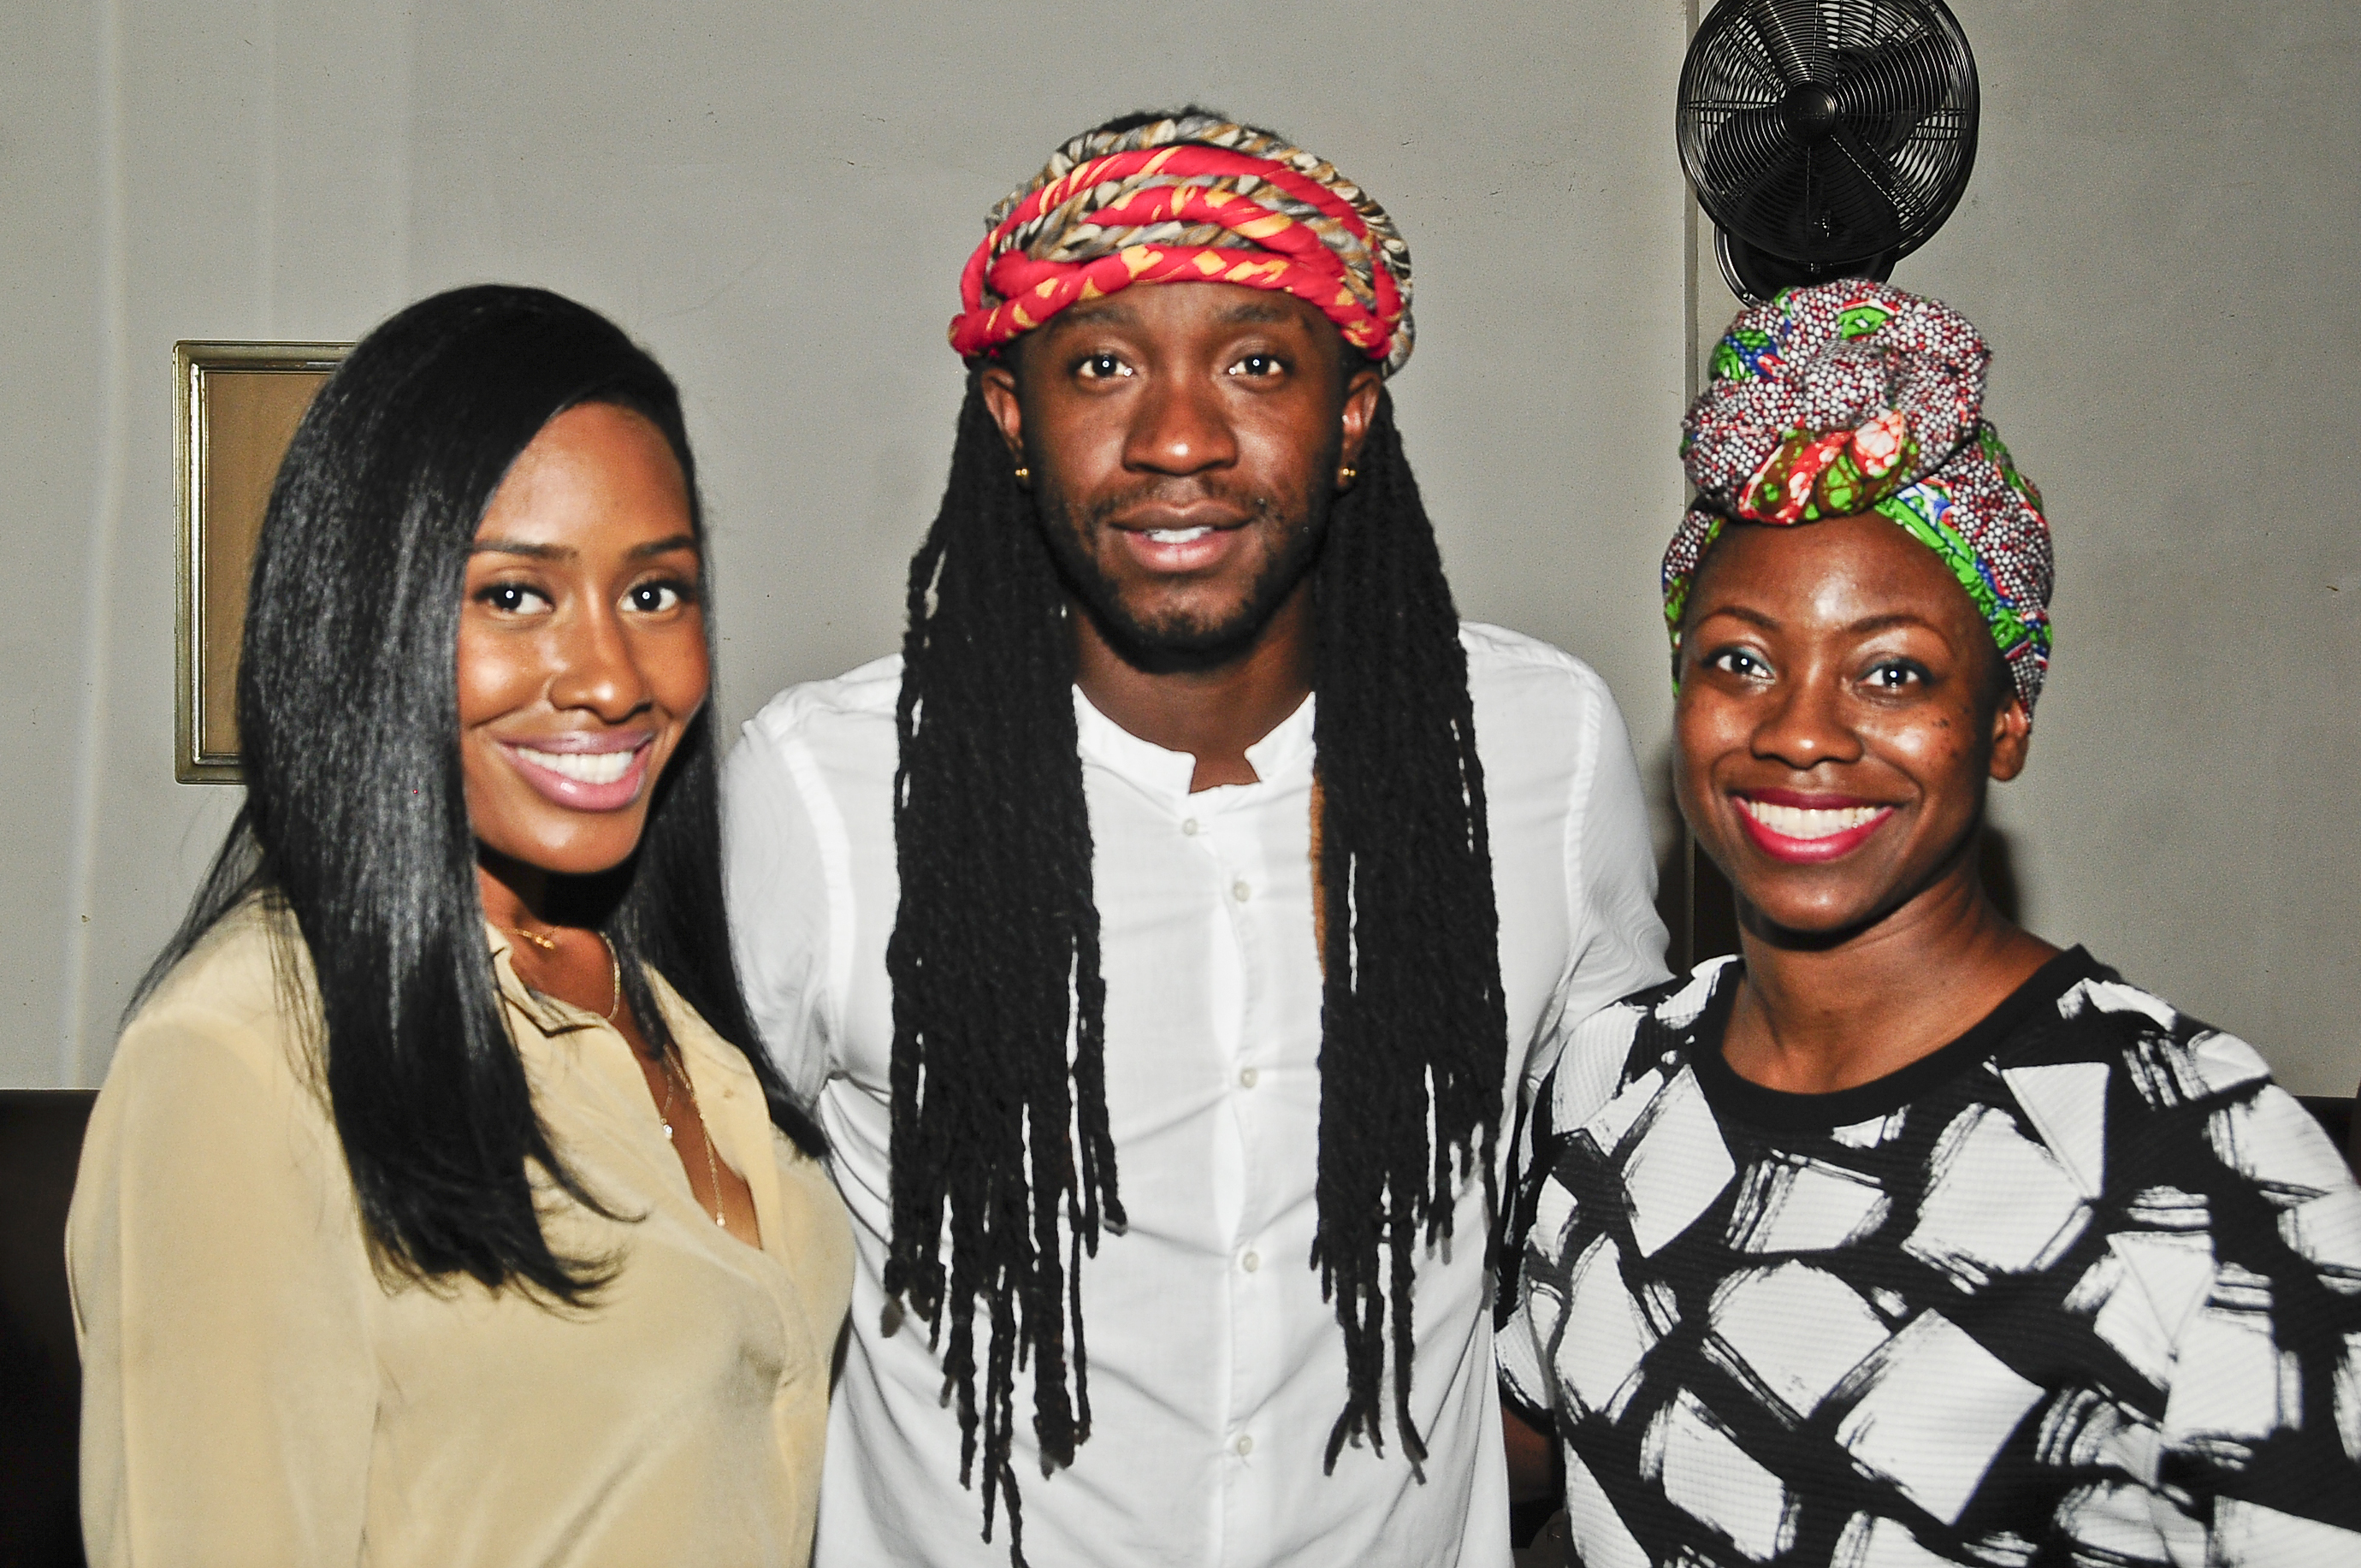 BROOKLYN, NY - SEPTEMBER 12: (L-R) Ashley Ryles, Ron Bass and Suakoko Betty at the Essence Street Style Pre-Event Dinner Sponsored by Chevrolet at Rye Restaurant in Brooklyn, New York on September 12, 2015. Credit: Raymond Hagans/PictureGroup